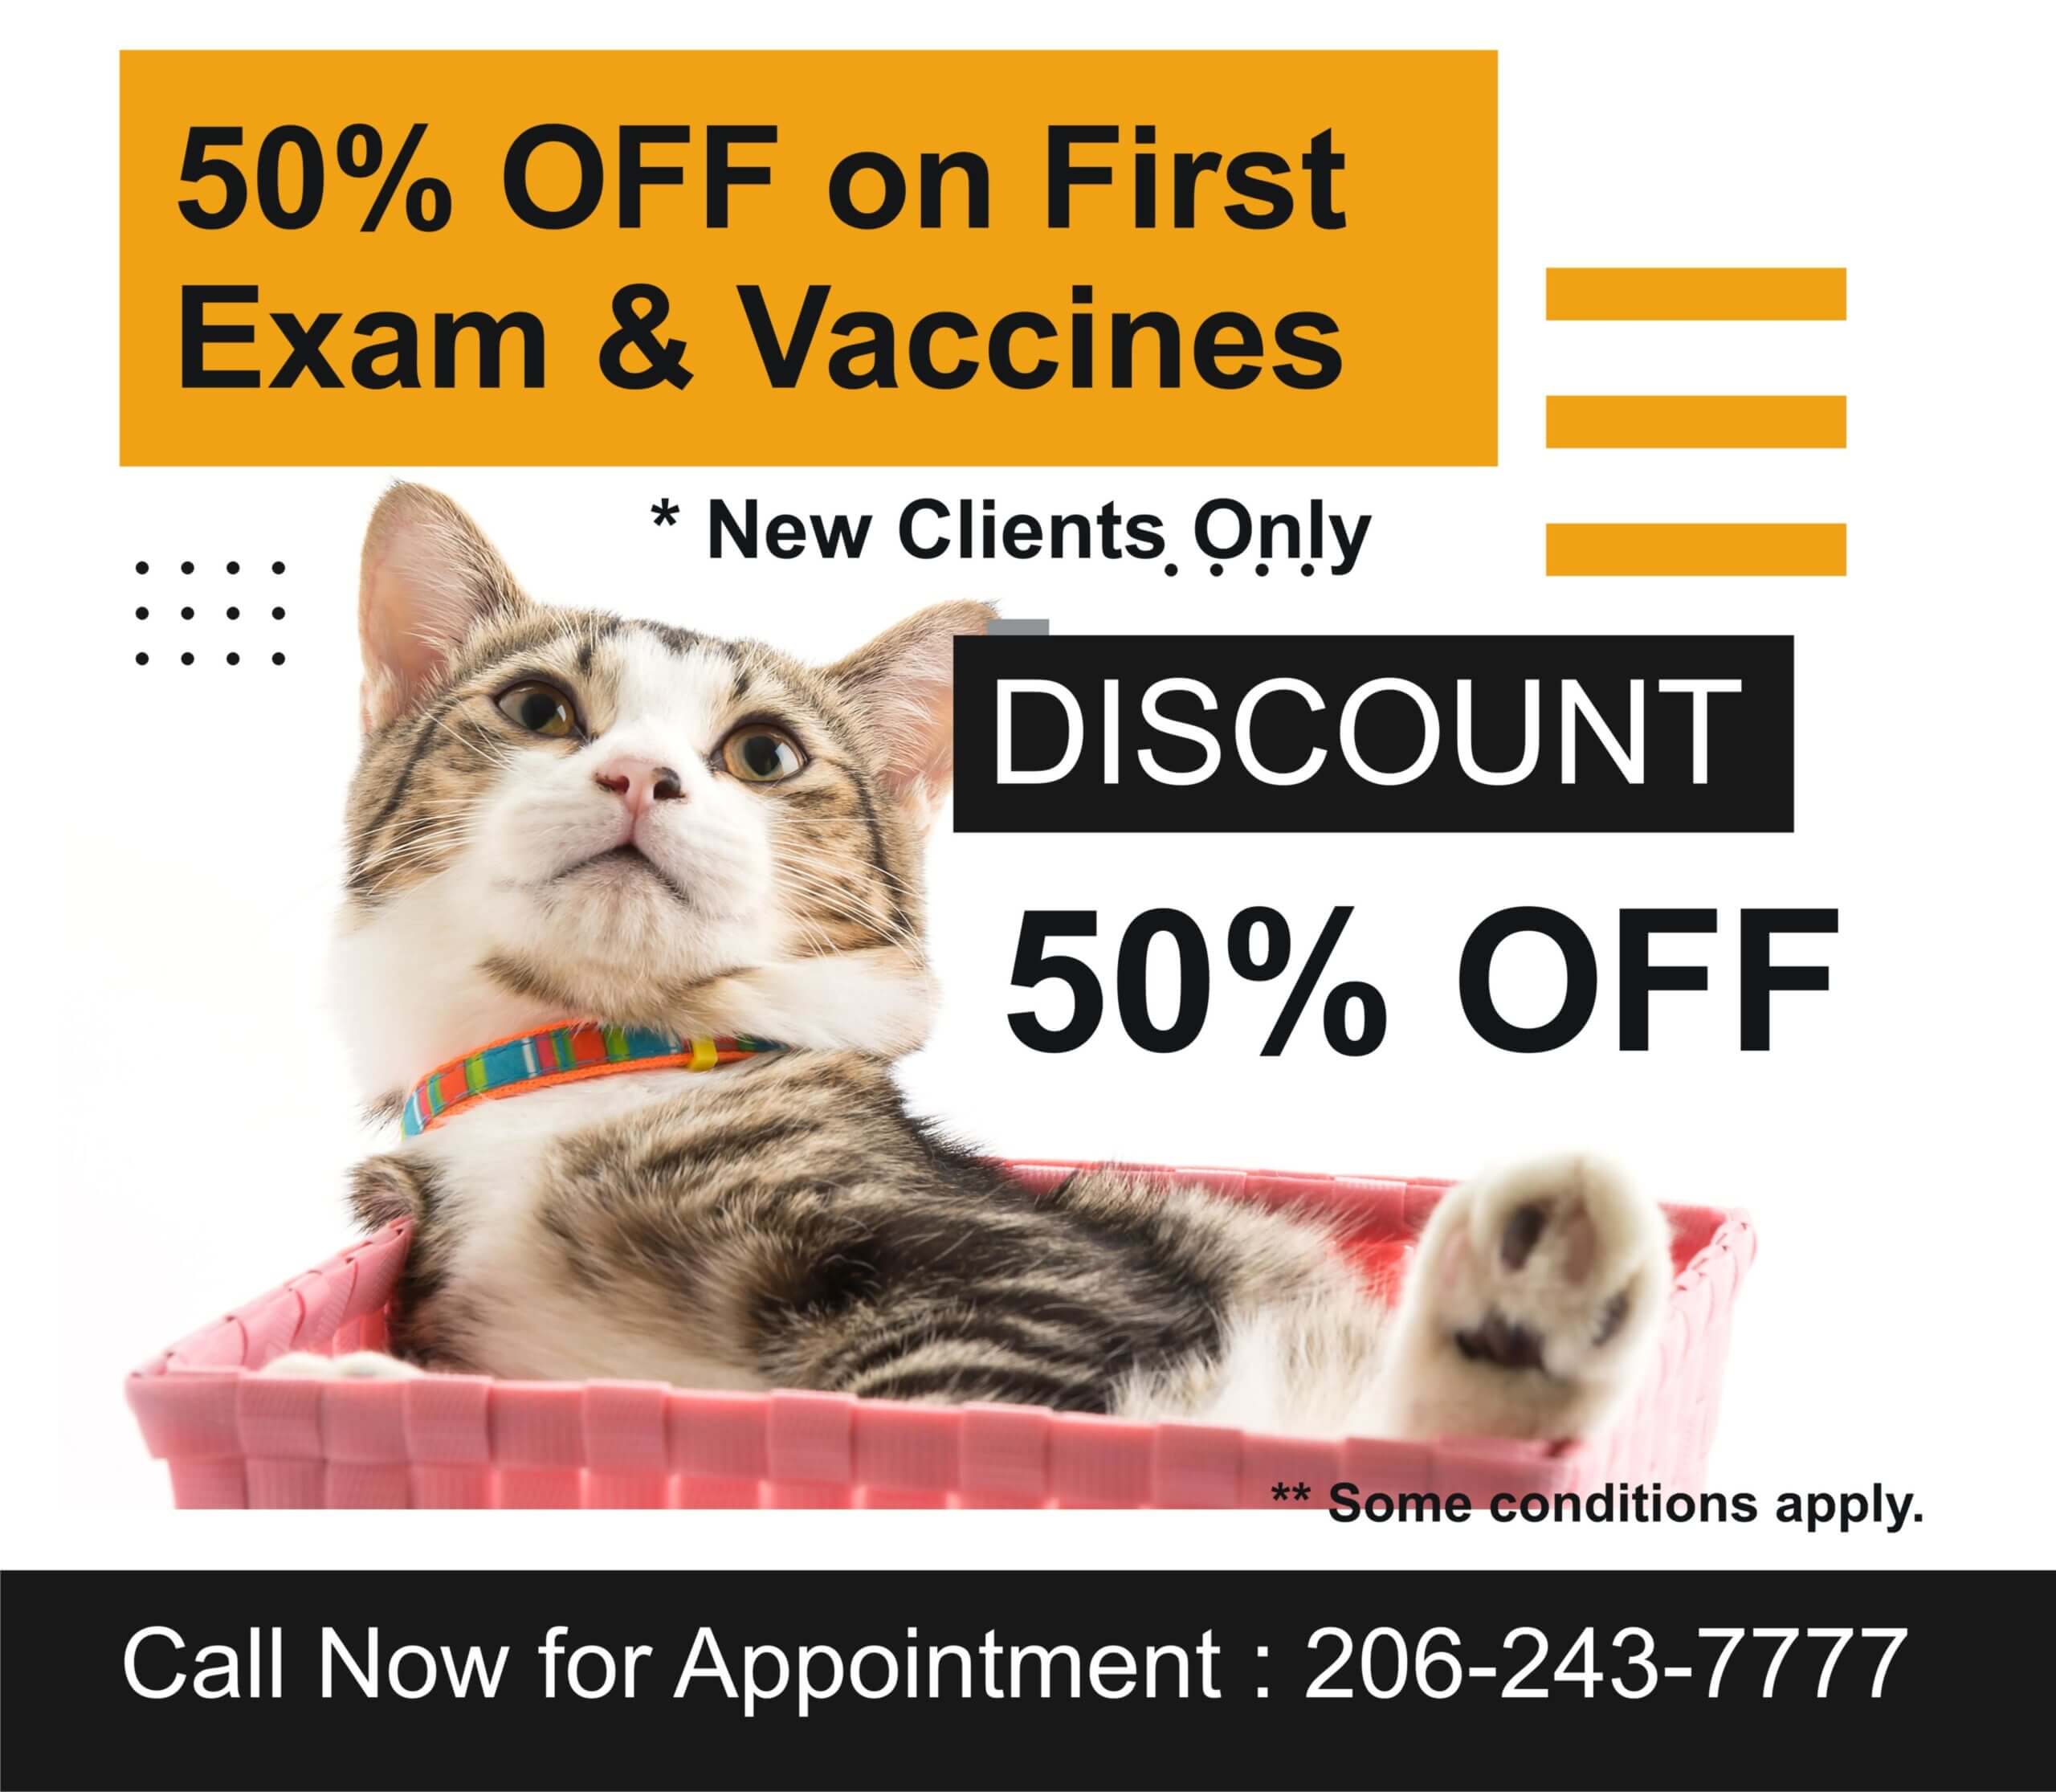 50% Off On First Exam & 10% OFF on Vaccines